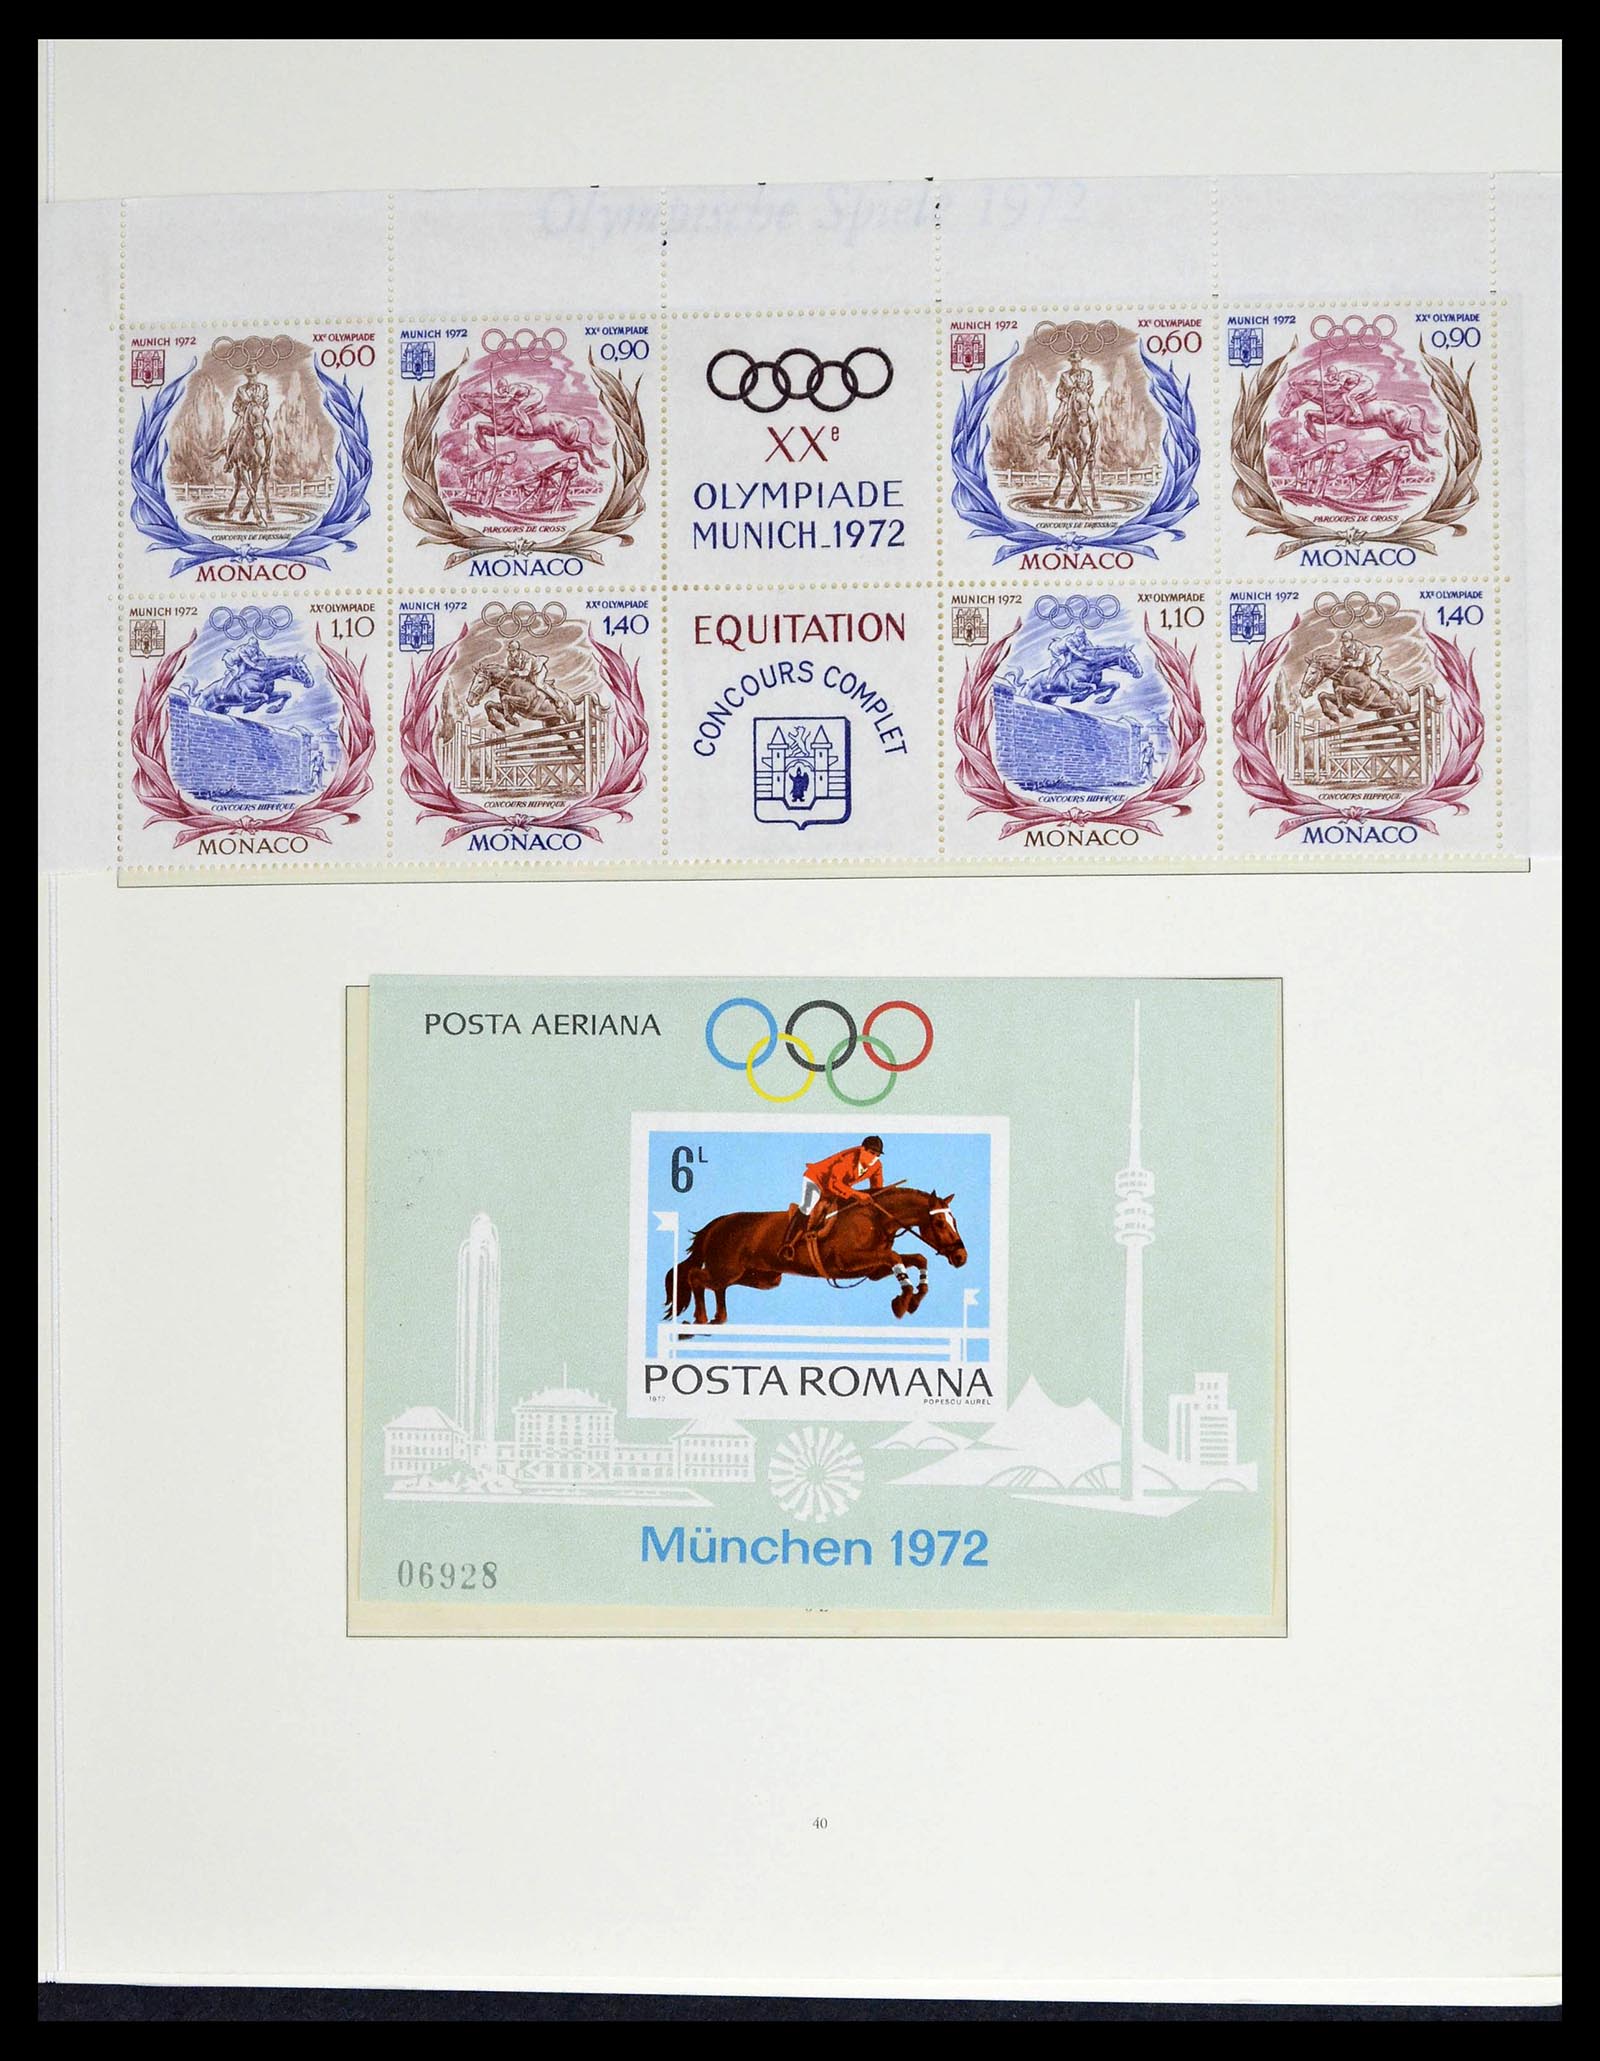 39237 0097 - Stamp collection 39237 Olympics 1972.